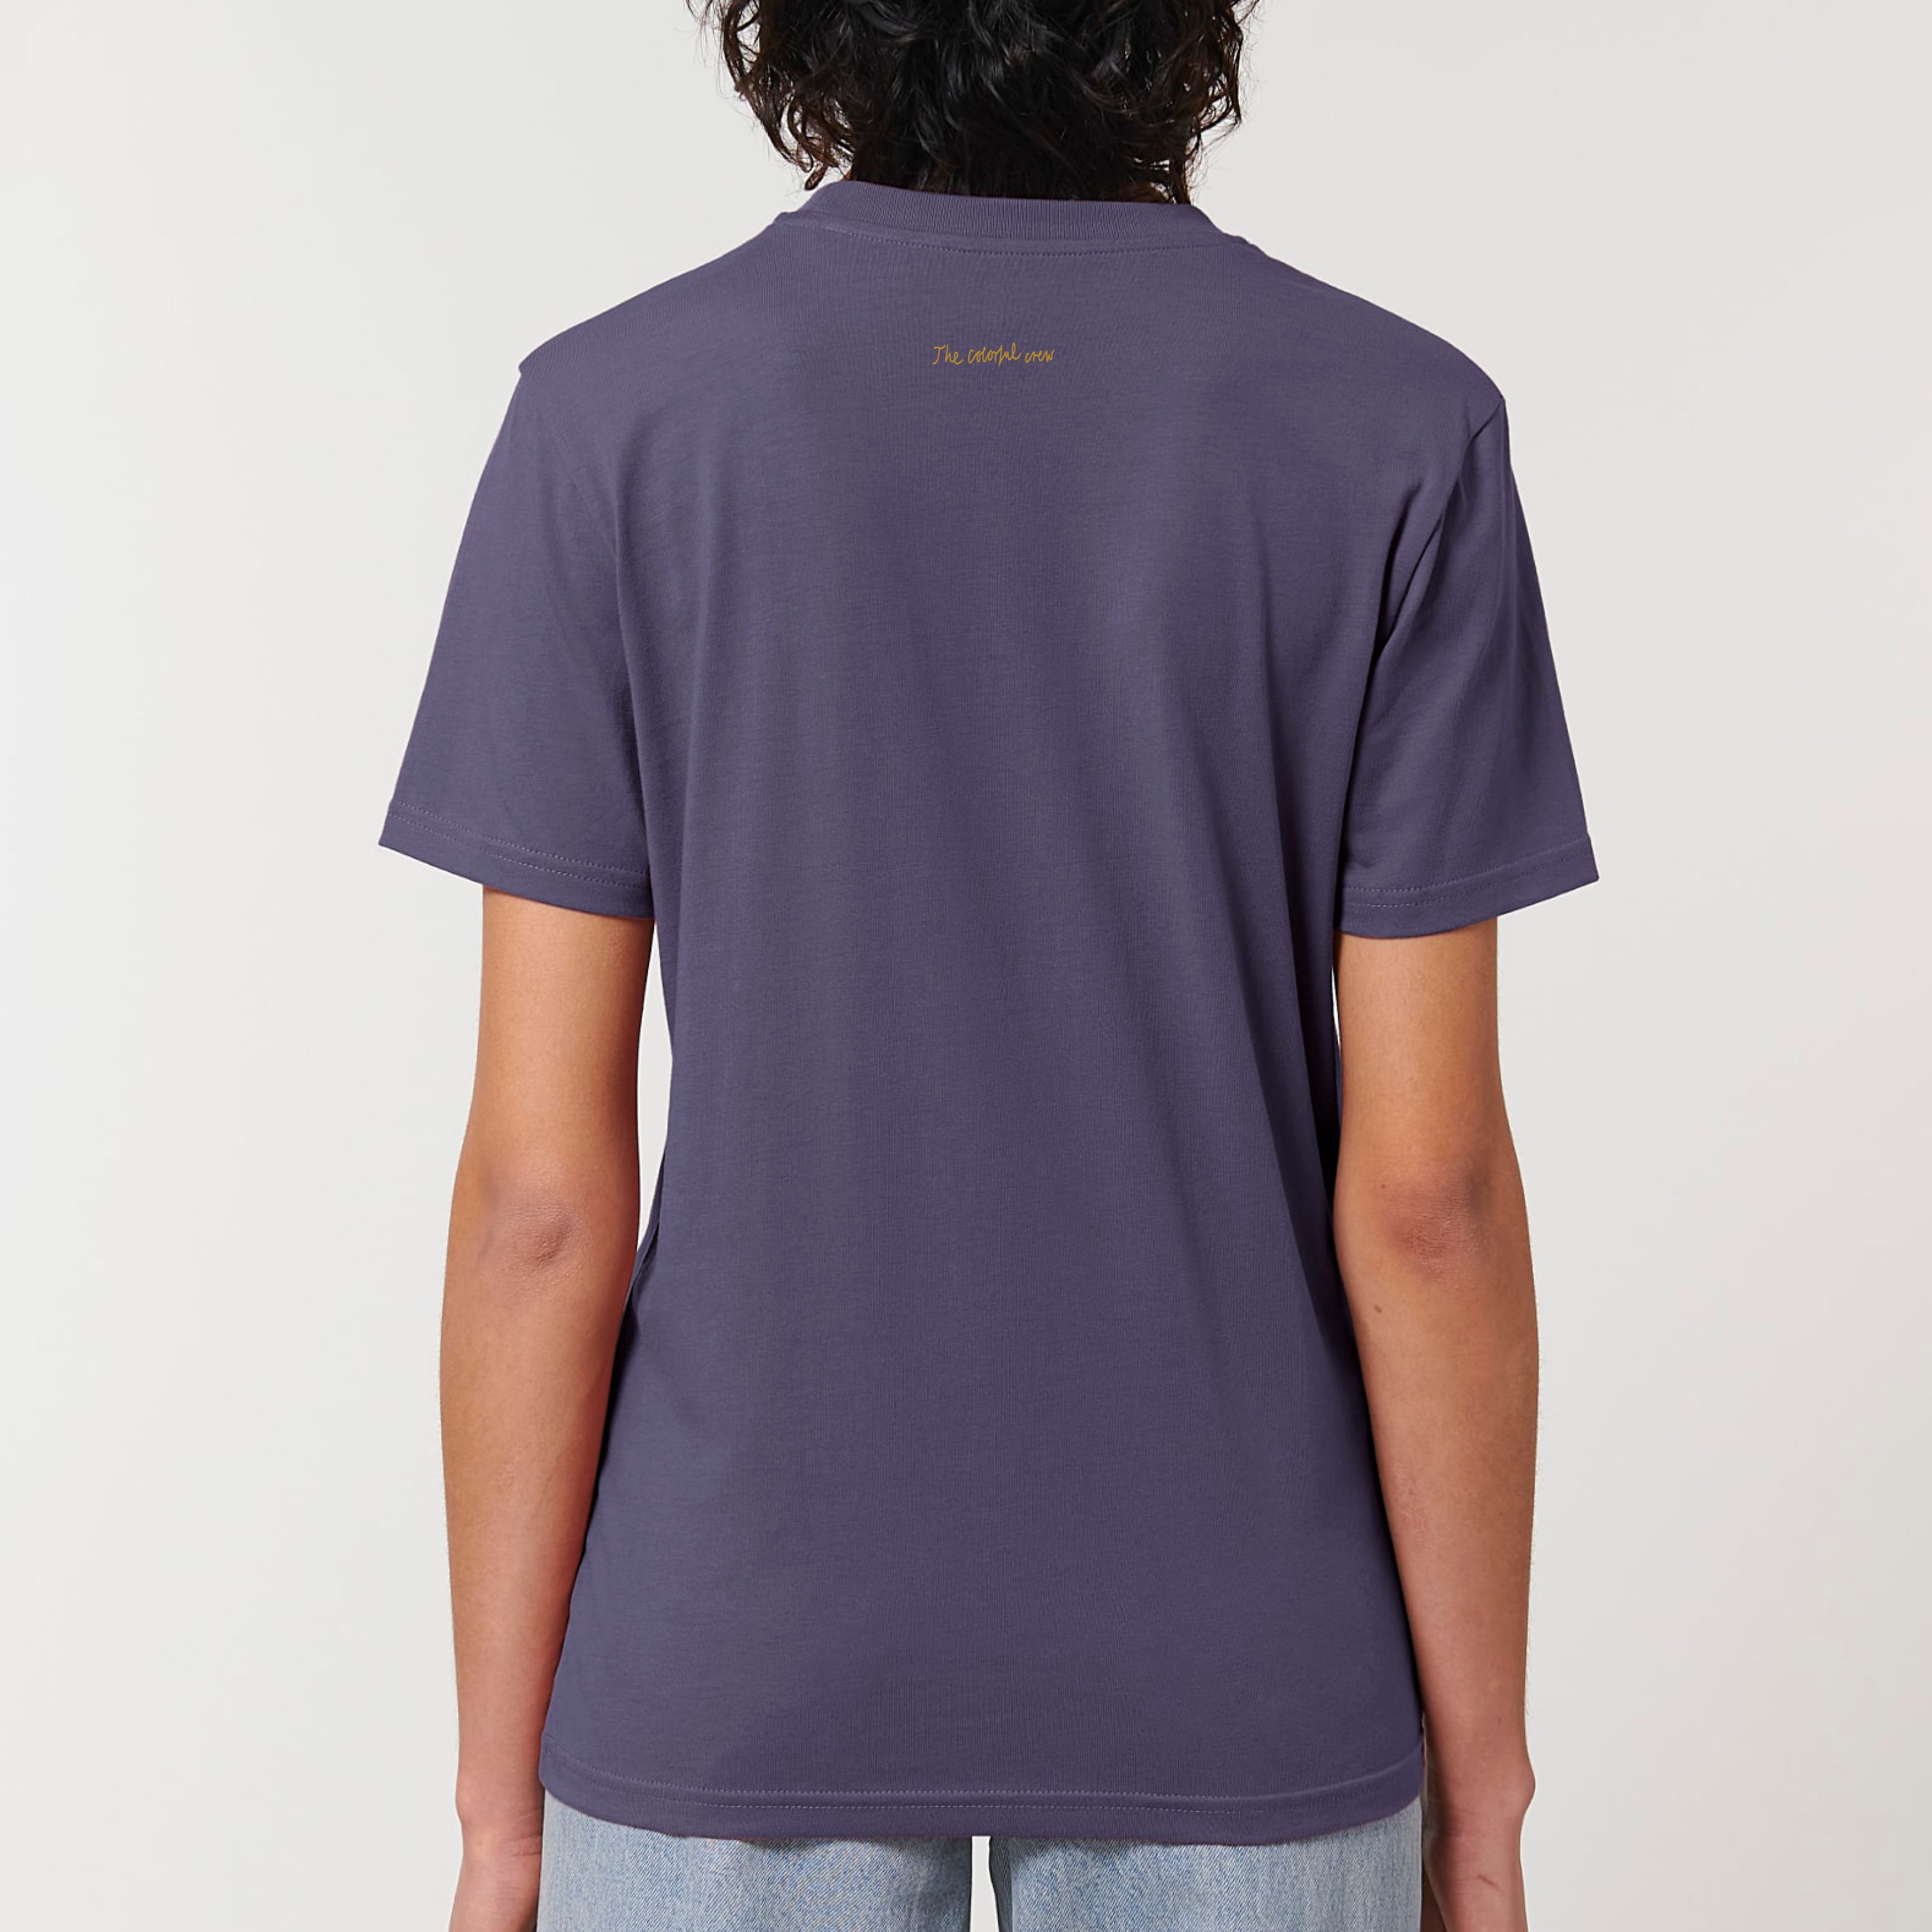 SALE // TO THE BAR T- shirt // Limited Edition